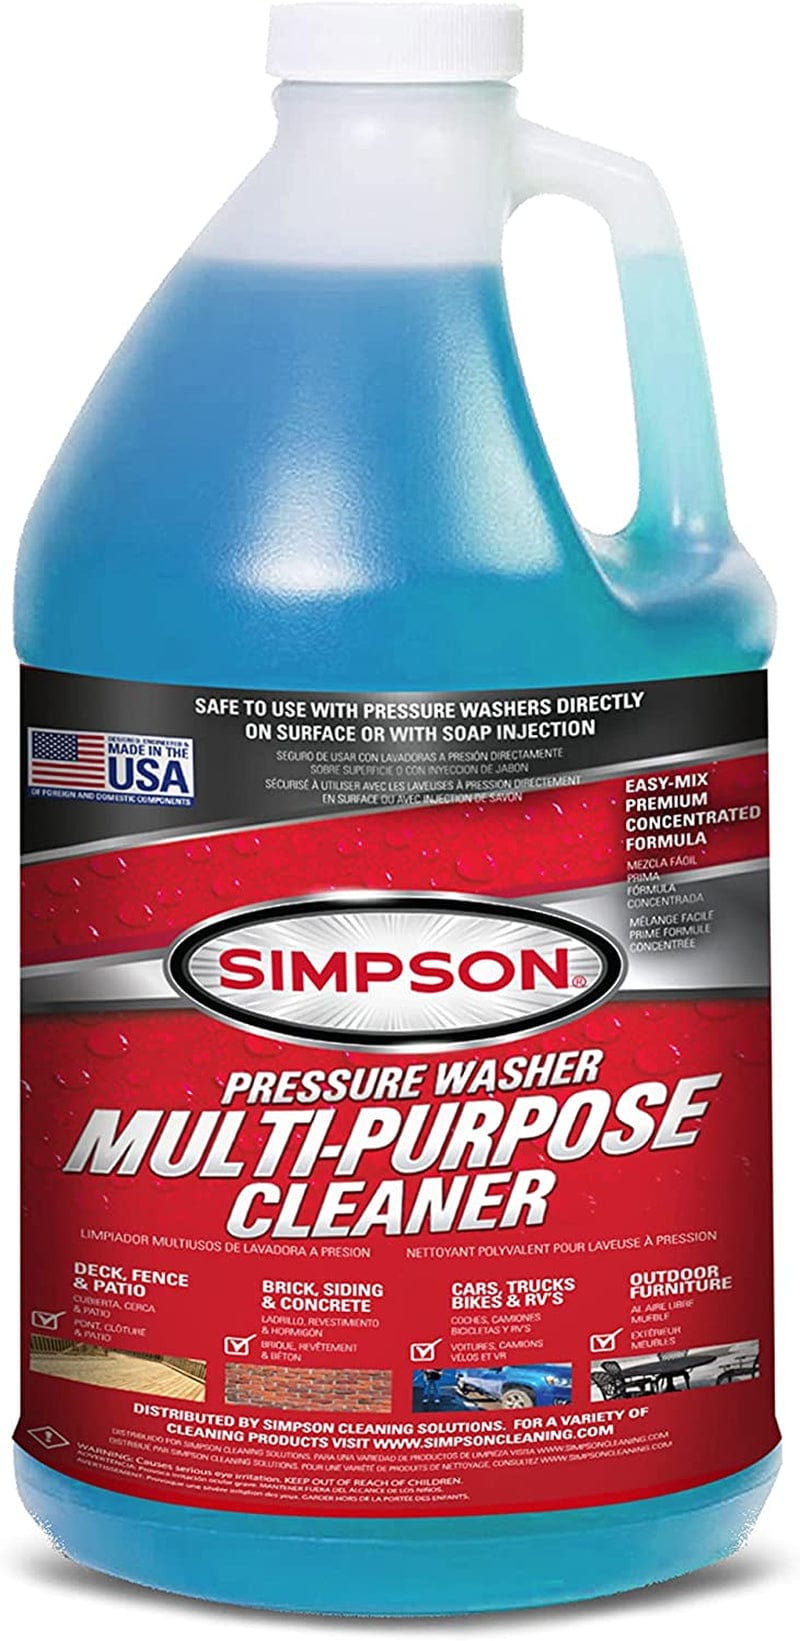 SIMPSON Cleaning 88282 Heavy Duty Cleaner, Concentrated Soap Solution for Pressure Washers and Spray Bottles, Use on Concrete, Vinyl Siding, Appliances, Windows, Cars, Fences, Decks, Purple, 1 Gallon Home & Garden > Household Supplies > Household Cleaning Supplies Simpson Multipurpose  